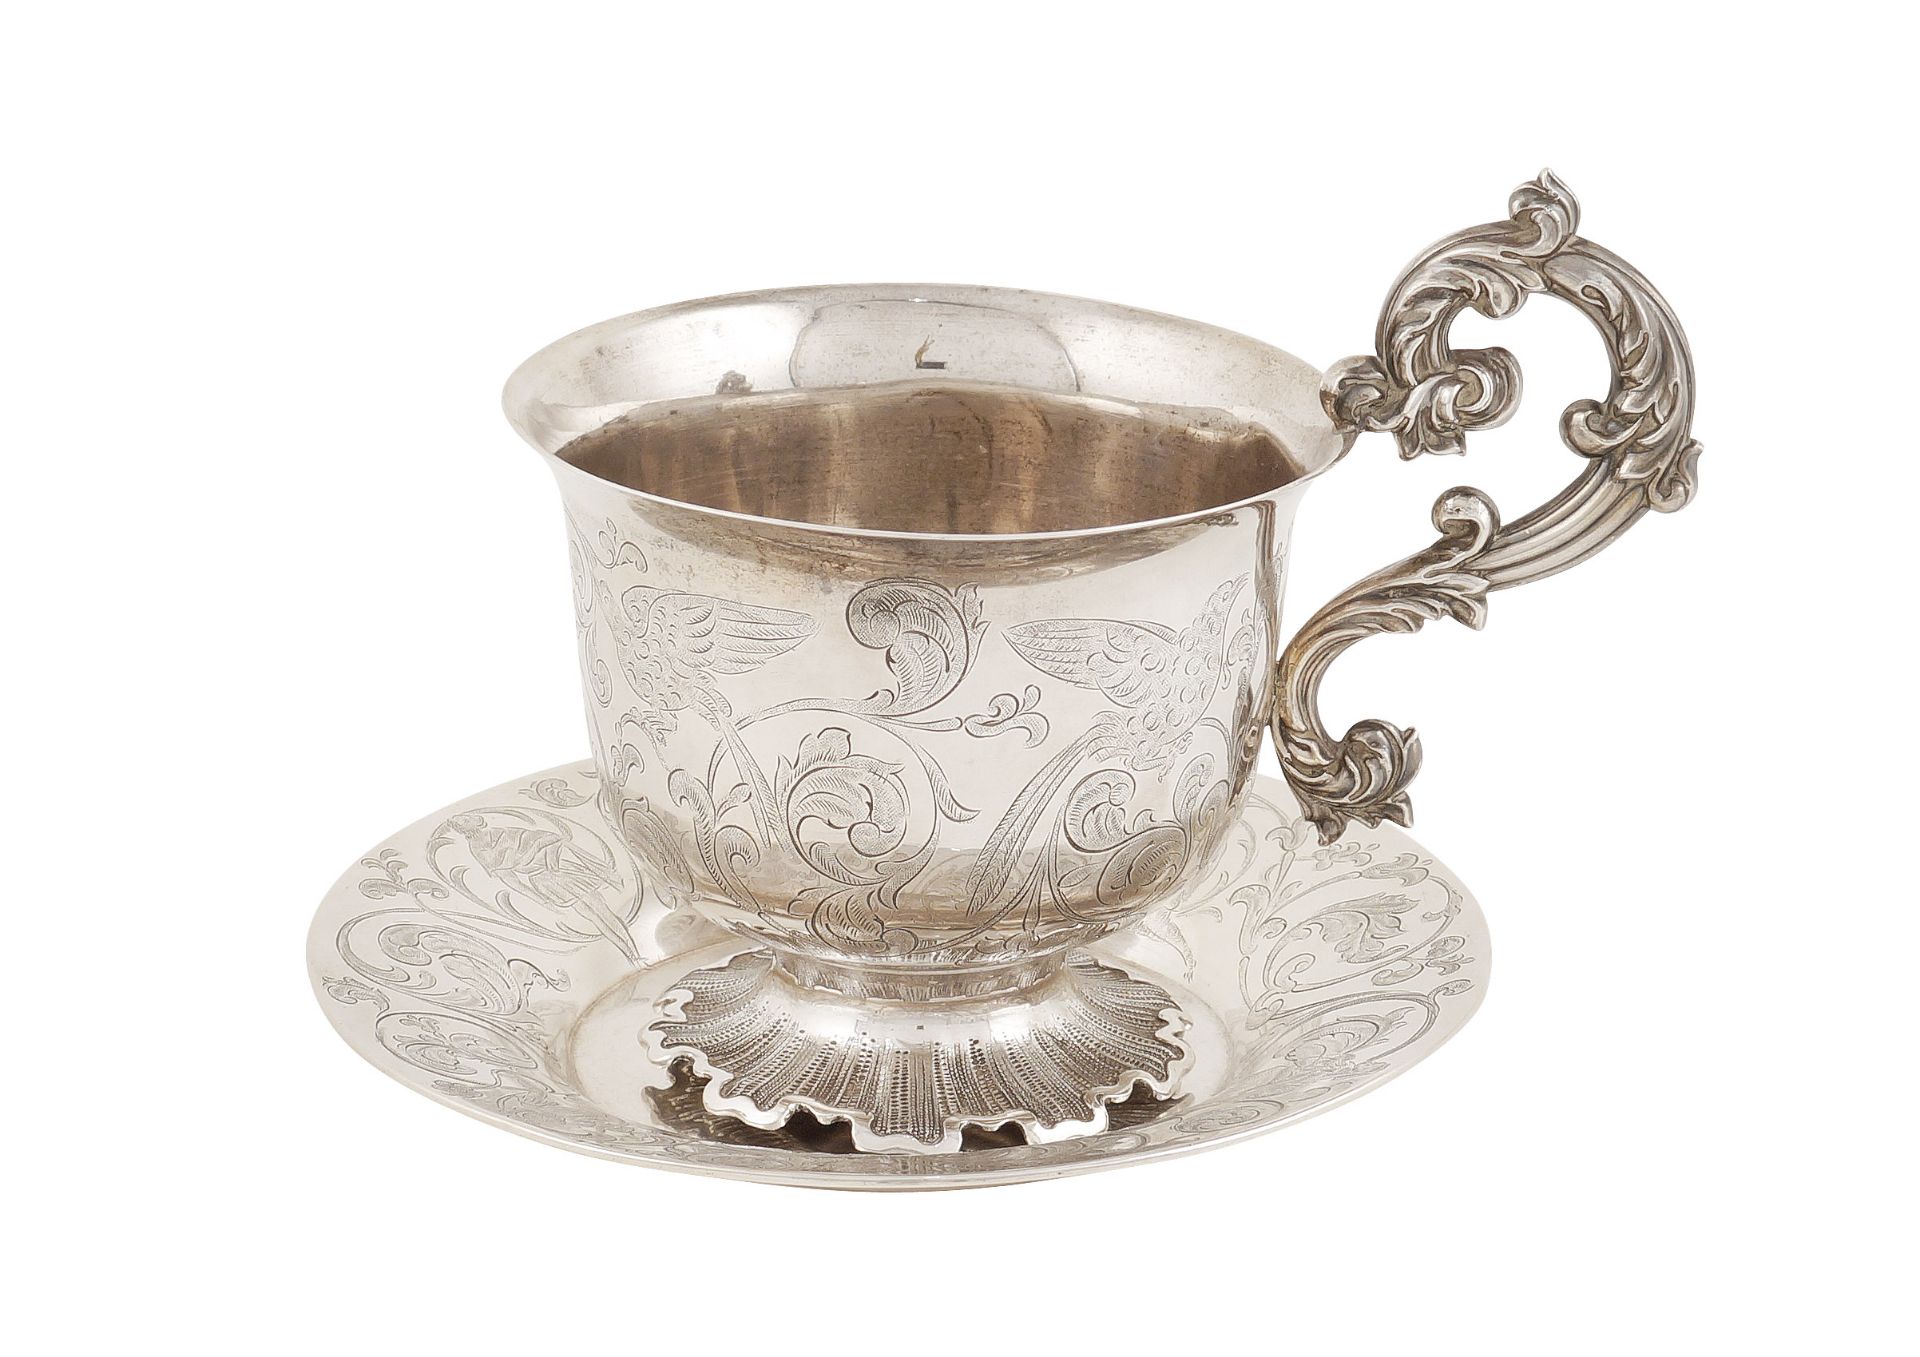 A silver cup with its plate Rome, late 19th century d. 6 cm. - 13x11 cm.